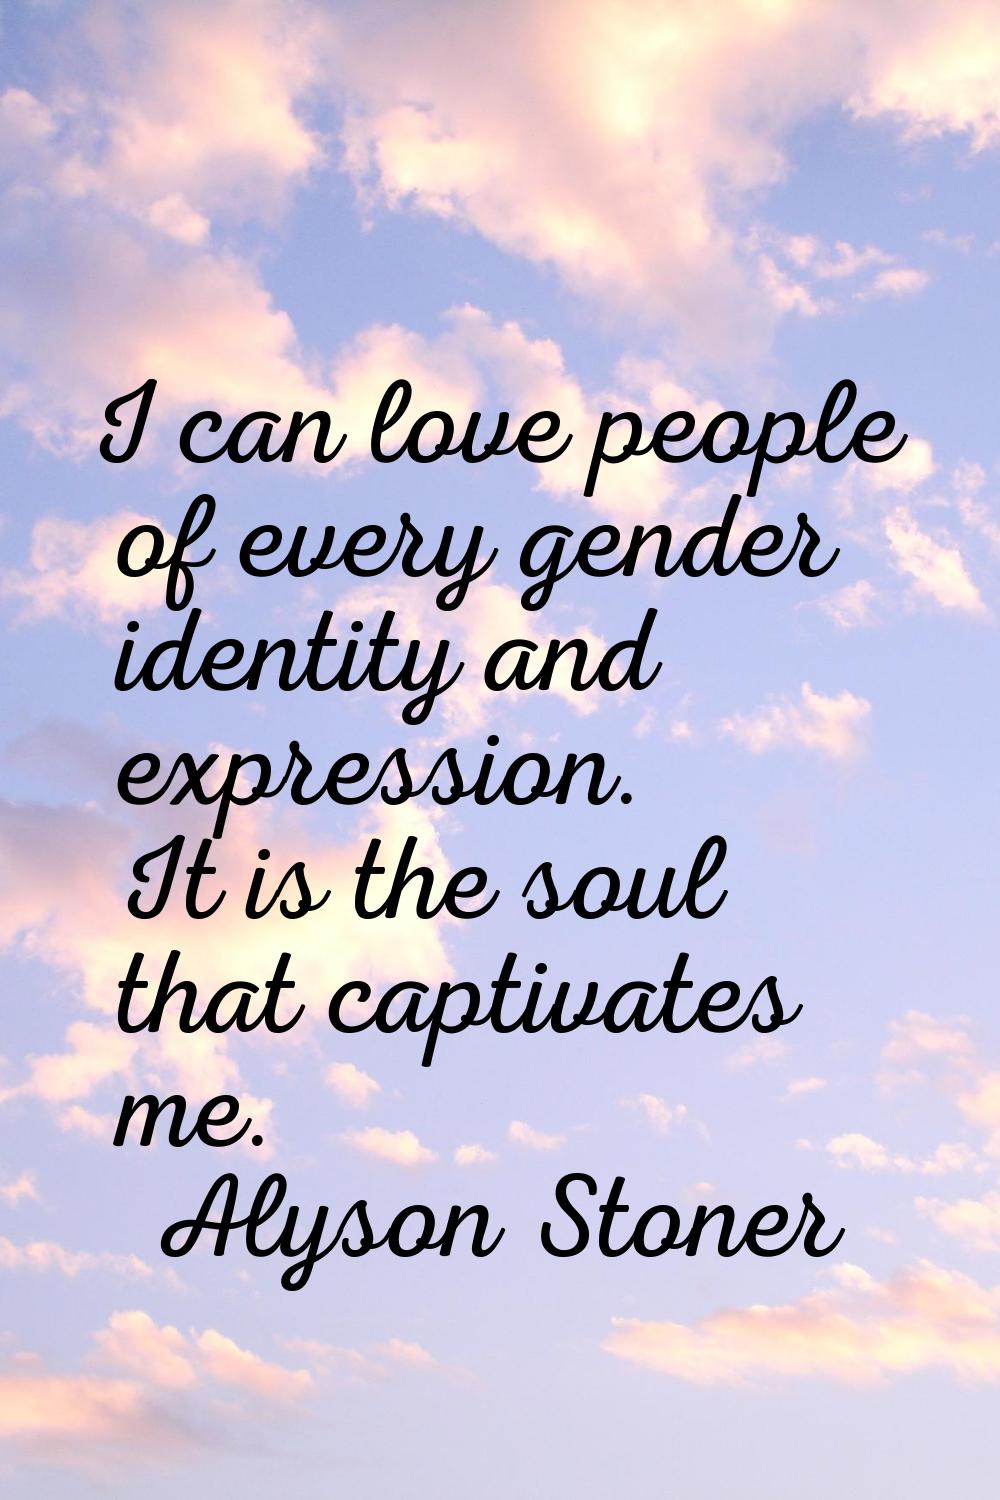 I can love people of every gender identity and expression. It is the soul that captivates me.